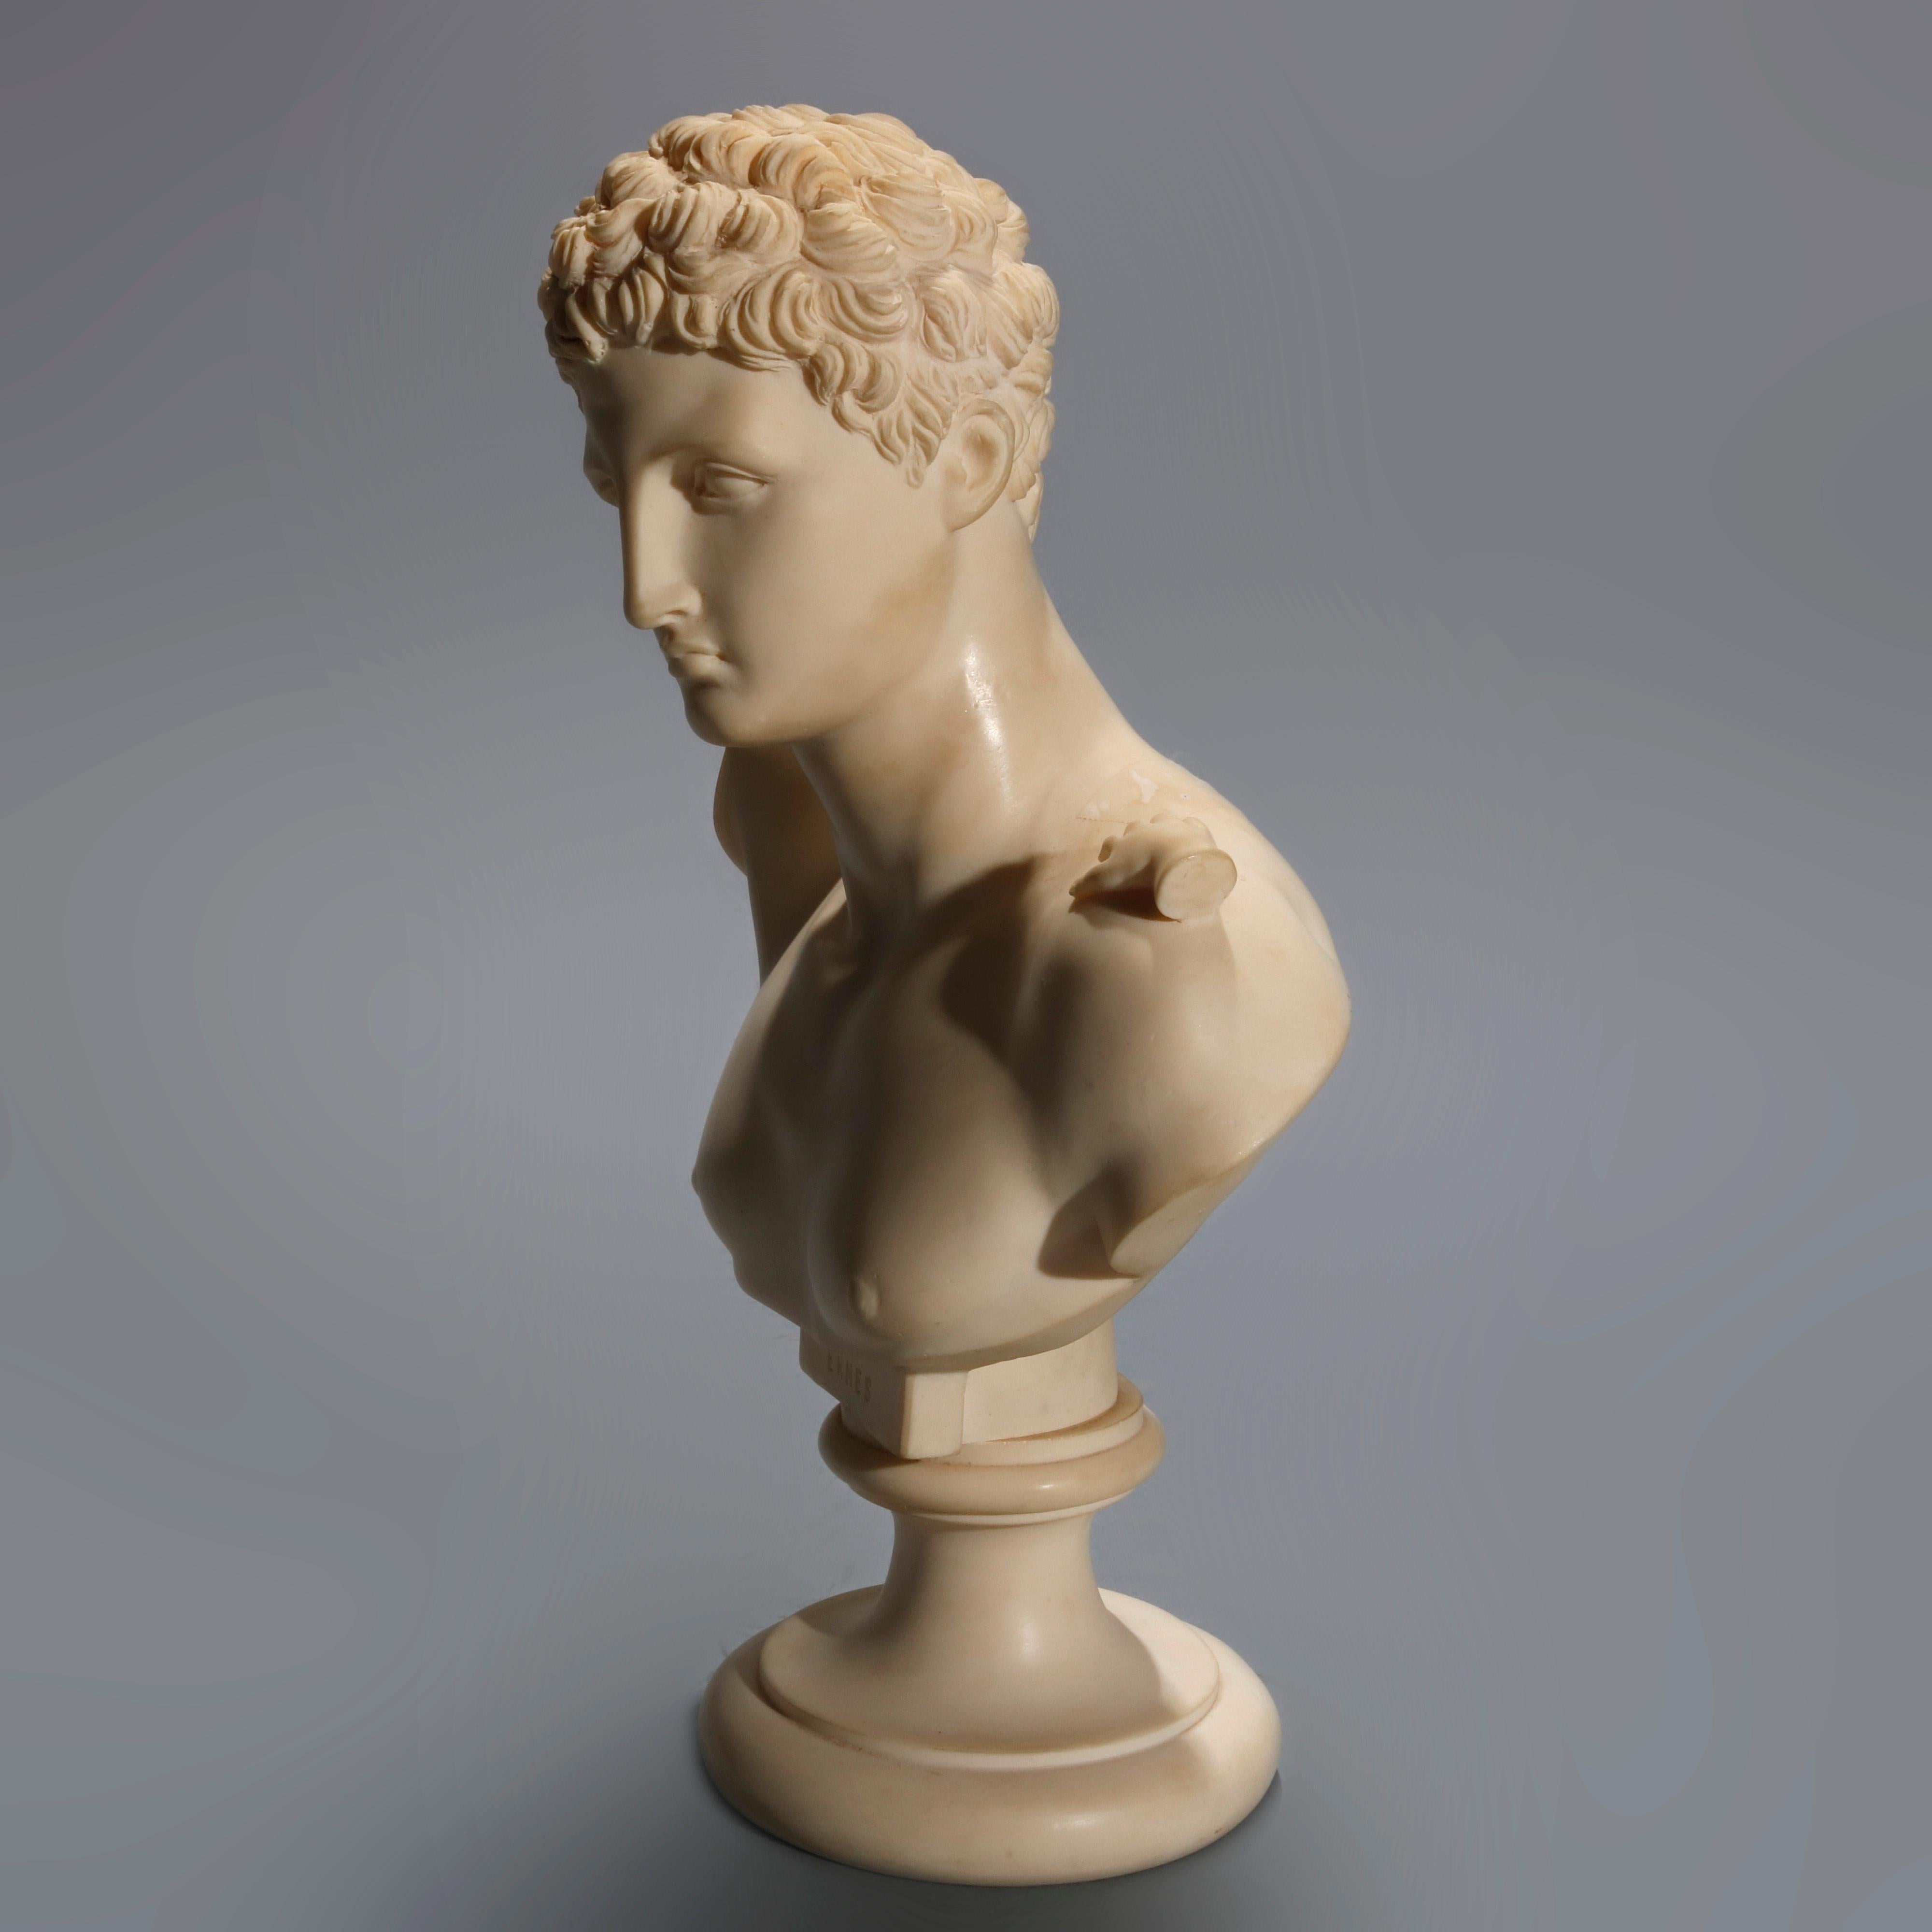 An antique molded composition portrait bust depicts David by Michelangelo on stepped plinth, signed G. Ruggeri Ermes, 20th century.

Measures: 12.63